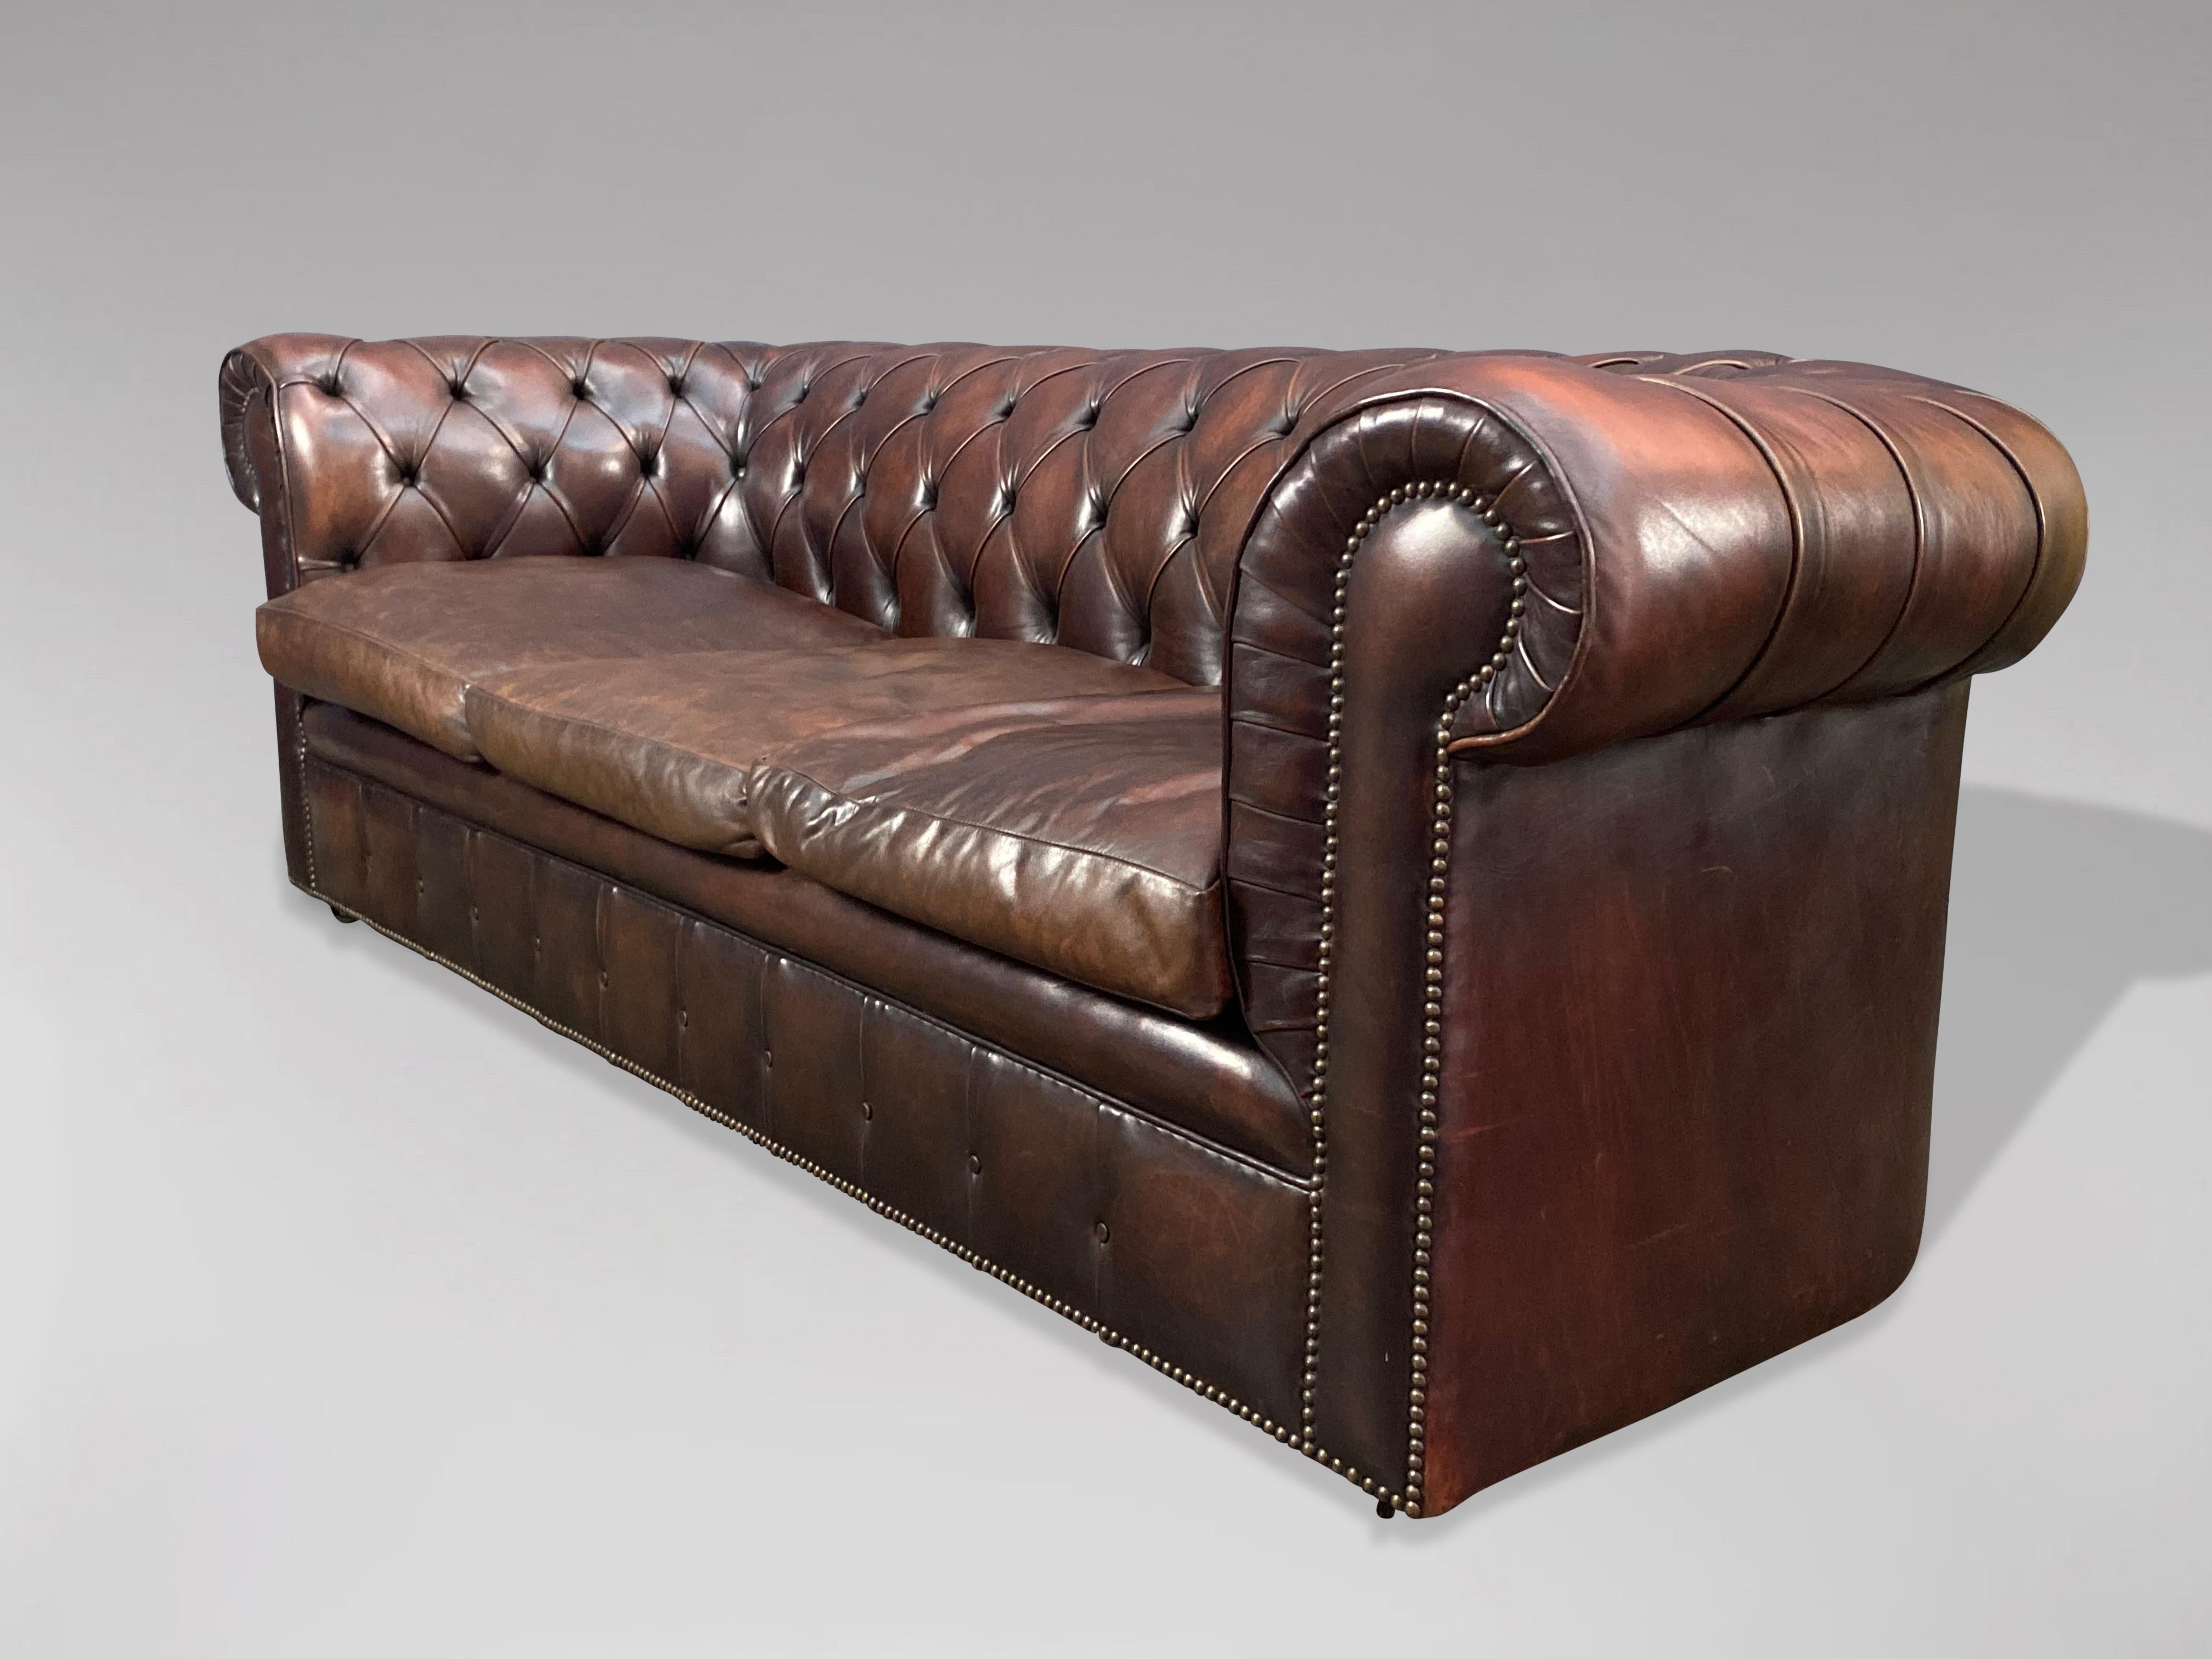 A superb quality early 20th century large three seater brown leather chesterfield with three loose feathered cushions, raised on castors. A fine example of a good quality with a good patina comfortable chesterfield. With the original quality brown